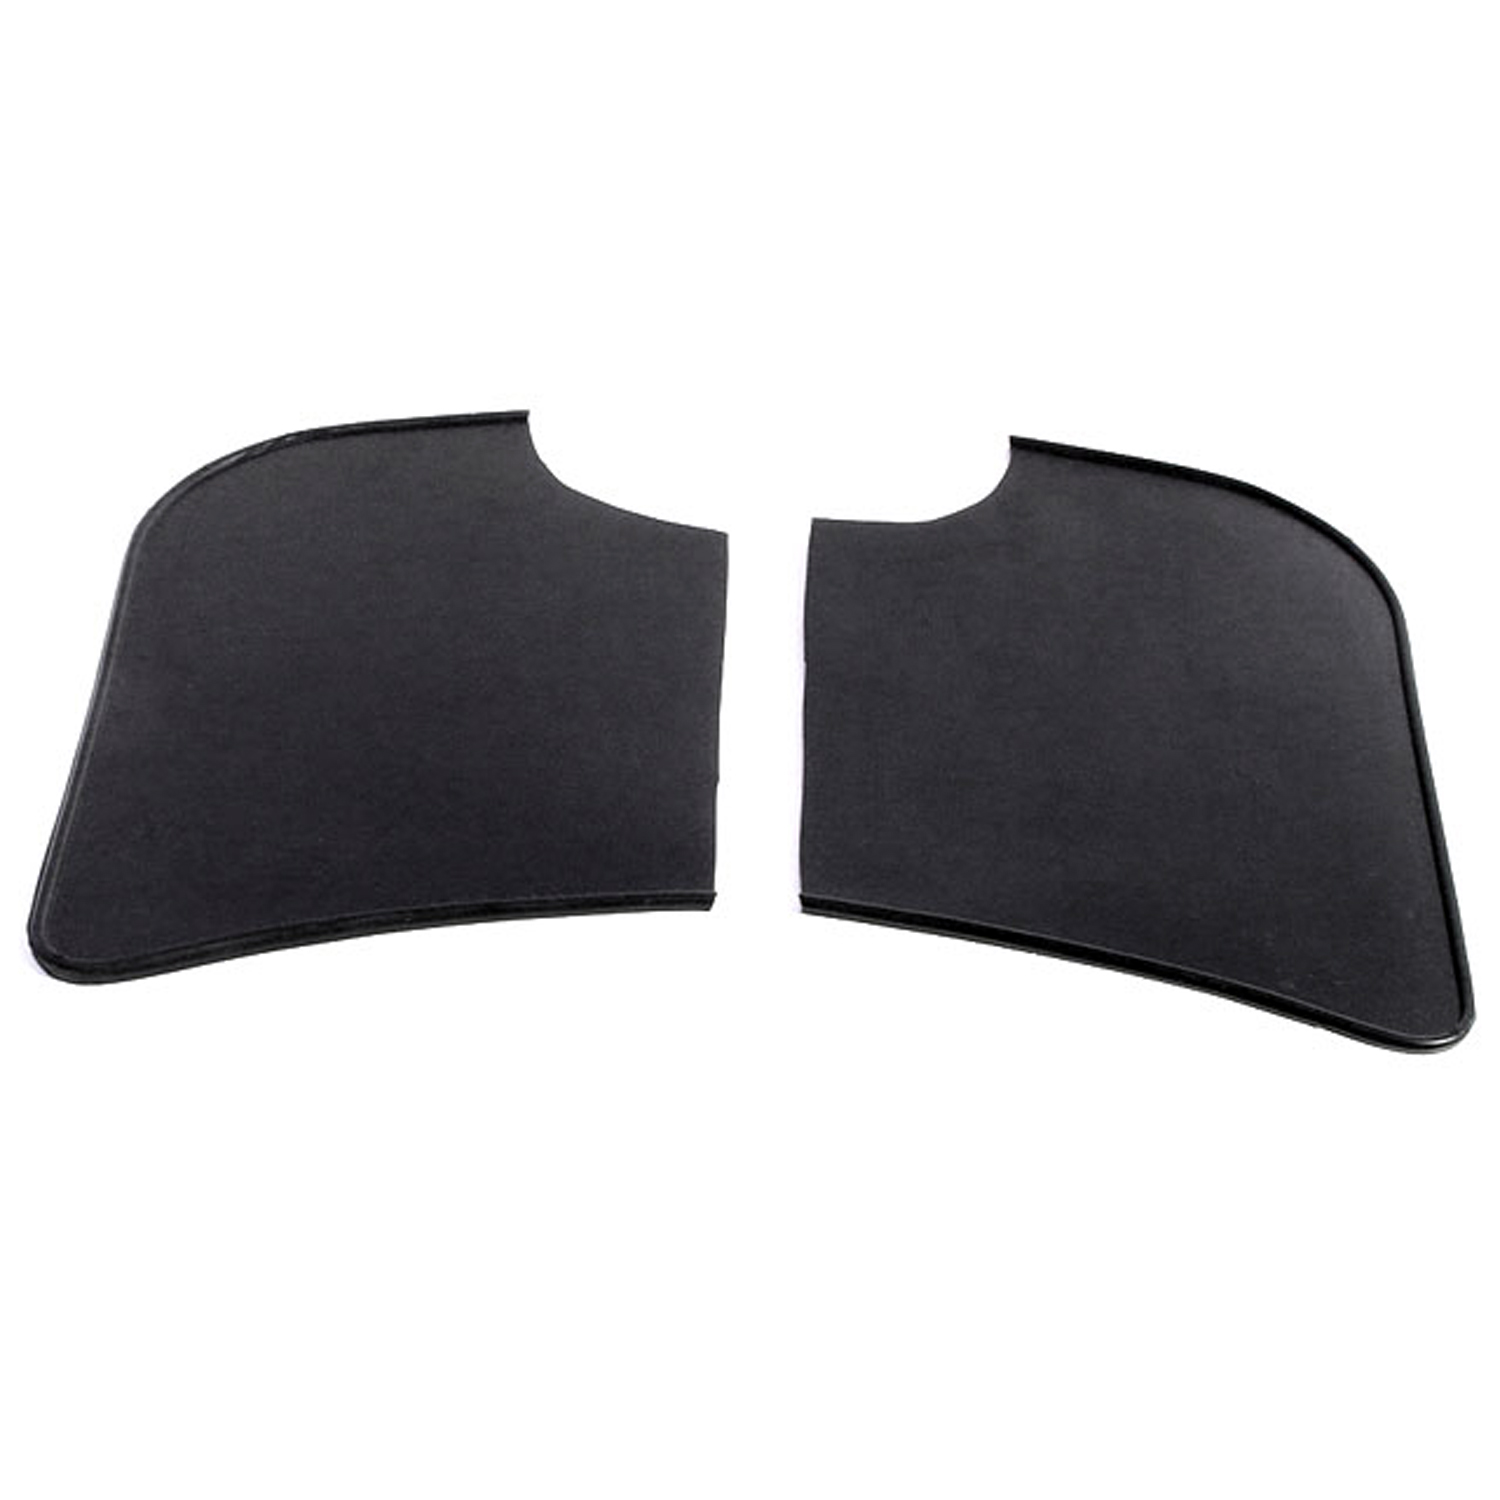 1977 Volkswagen Rabbit Gravel Shields.  Molded flat without metal backing plates-FS 40